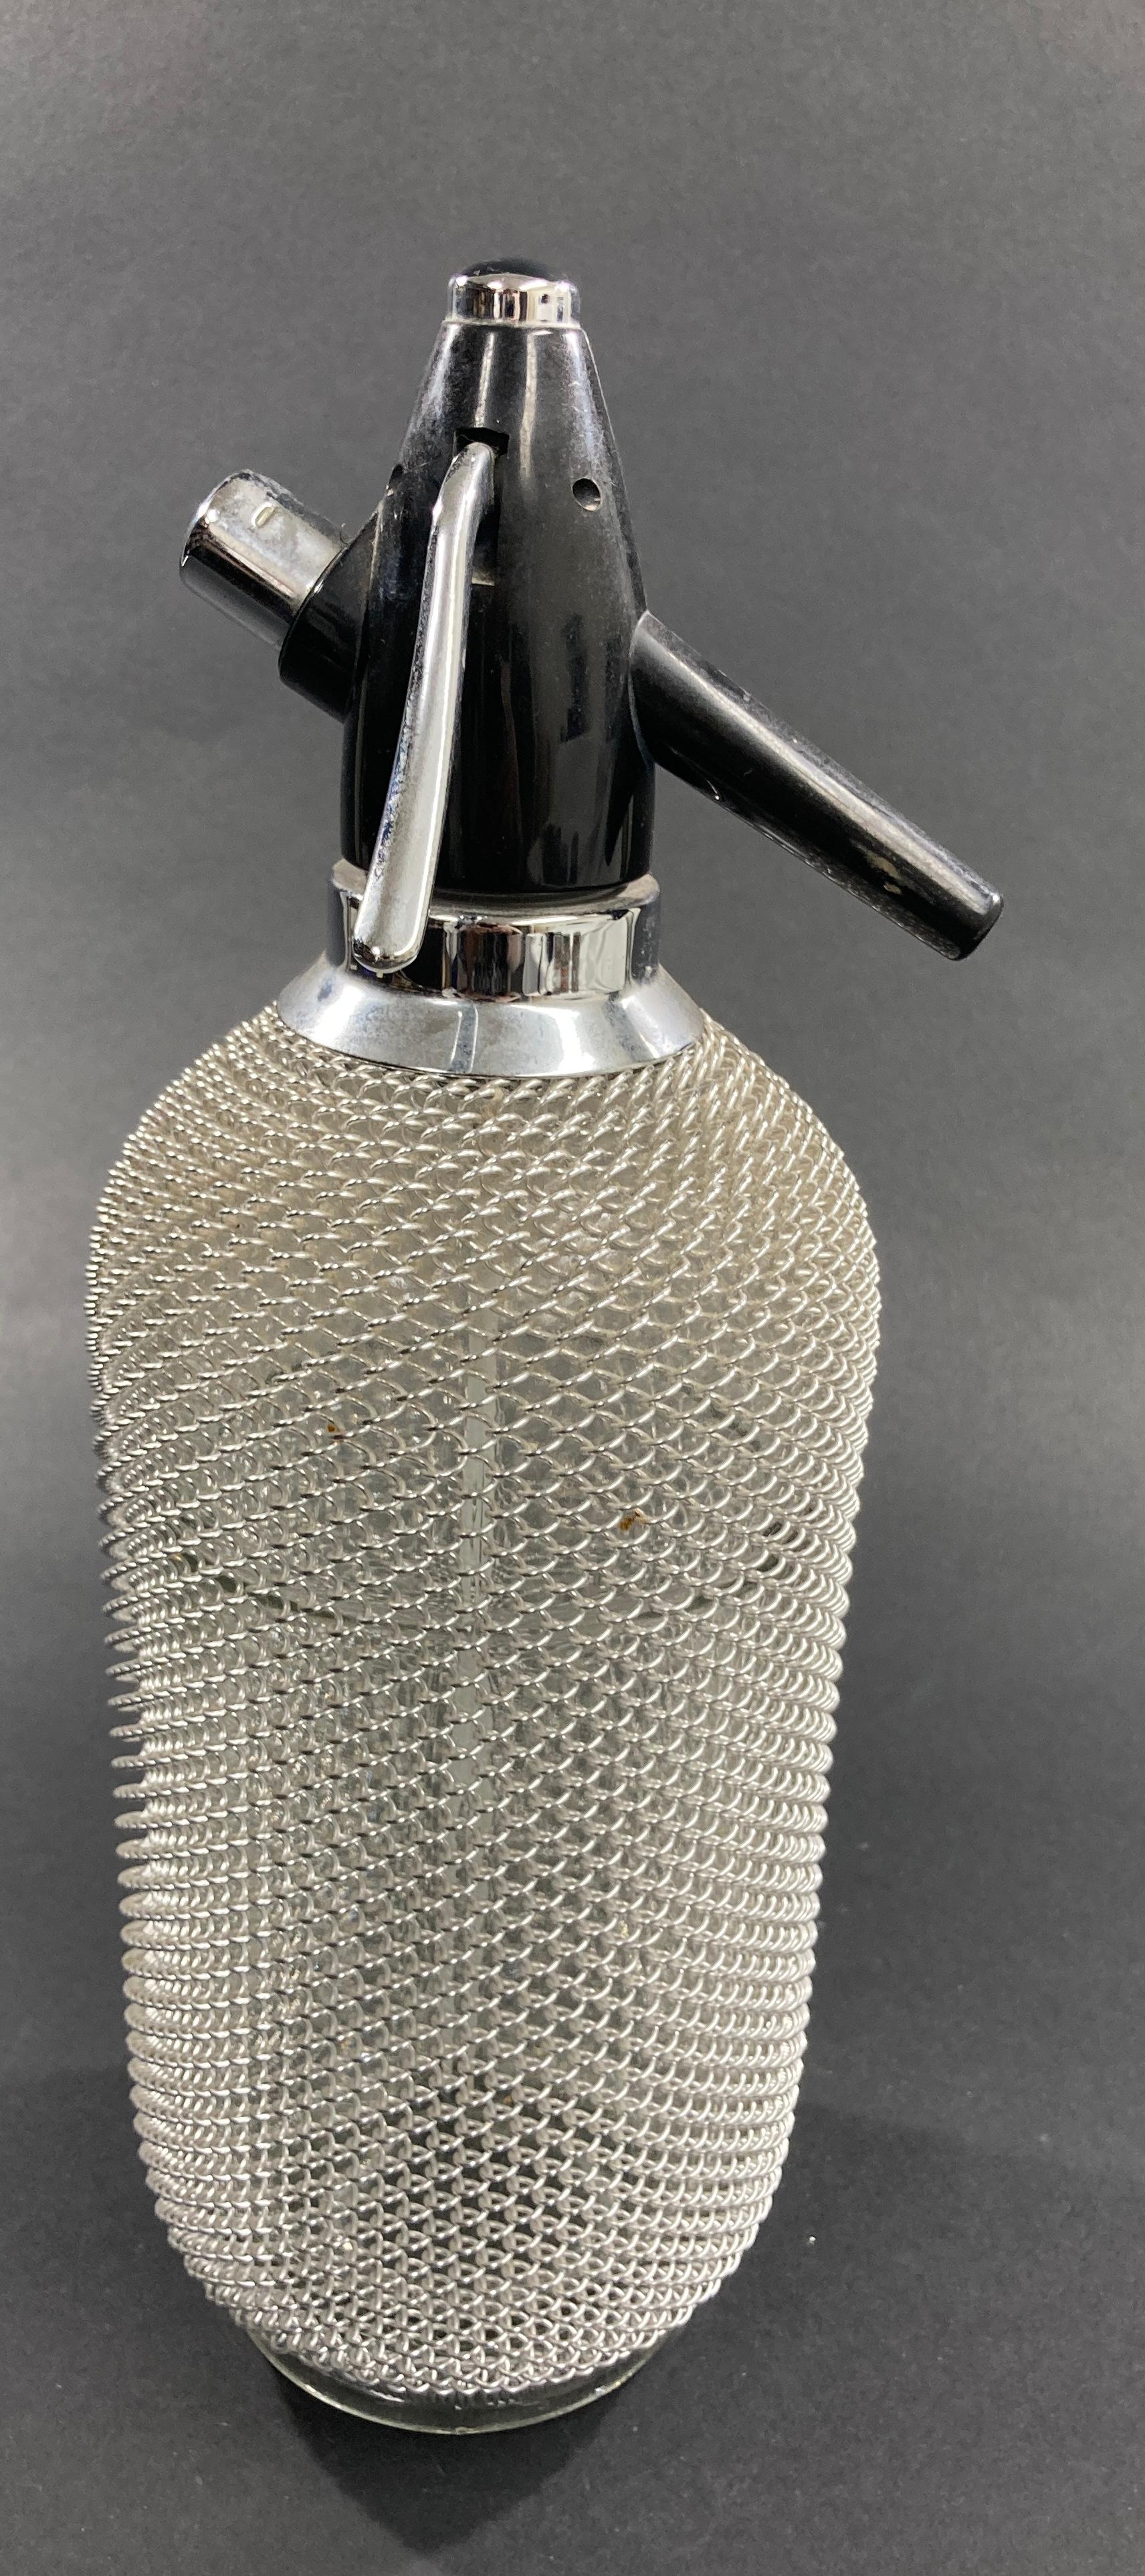 This is a fantastic vintage seltzer bottle with a metal wire mesh casing around the glass from the 1970.
Enjoy the fresh and healthy fizz of sparkling water, carbonated juice drinks, wine spritzers, and handcrafted cocktails. 
Vintage barware